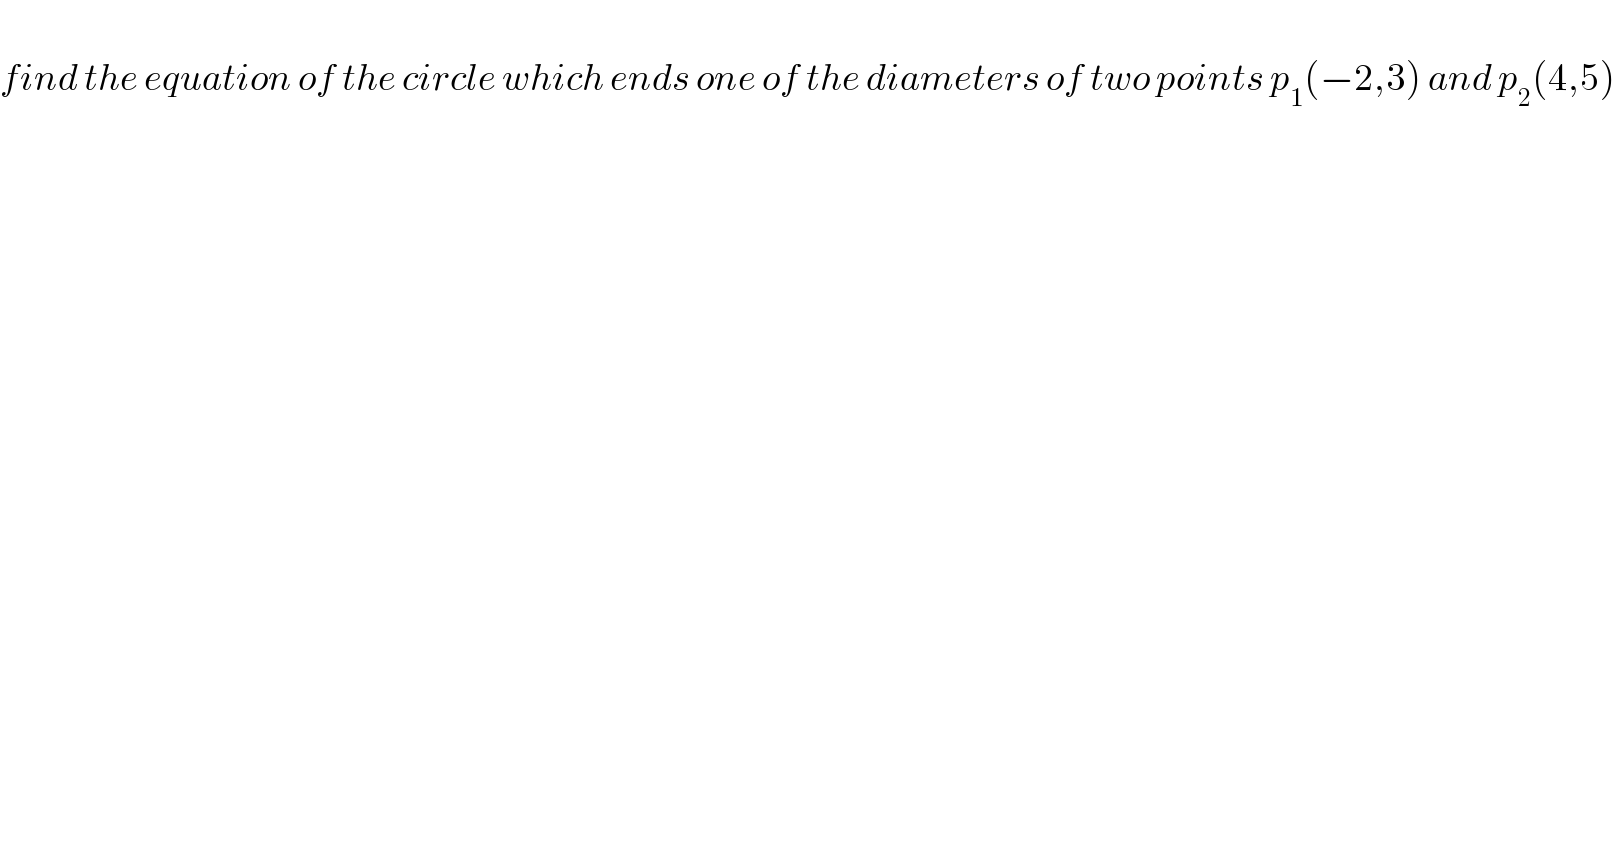   find the equation of the circle which ends one of the diameters of two points p_1 (−2,3) and p_2 (4,5)  